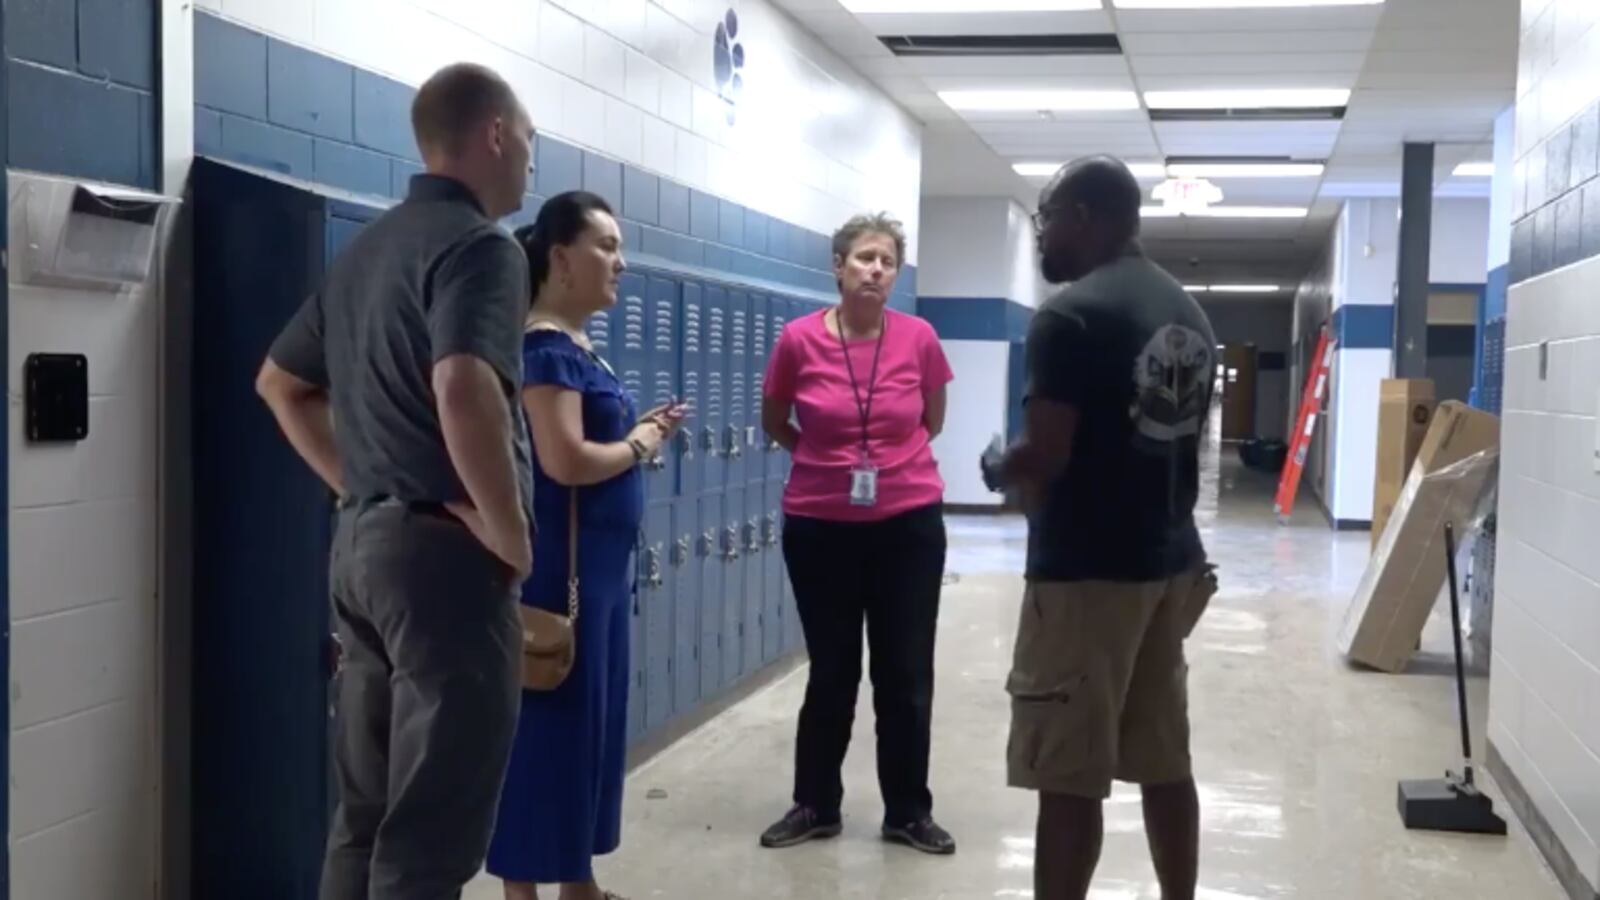 Shelby County Schools employees tour Kirby High School during repairs. District officials announced Thursday that the school would remain closed due to a pest infestation.